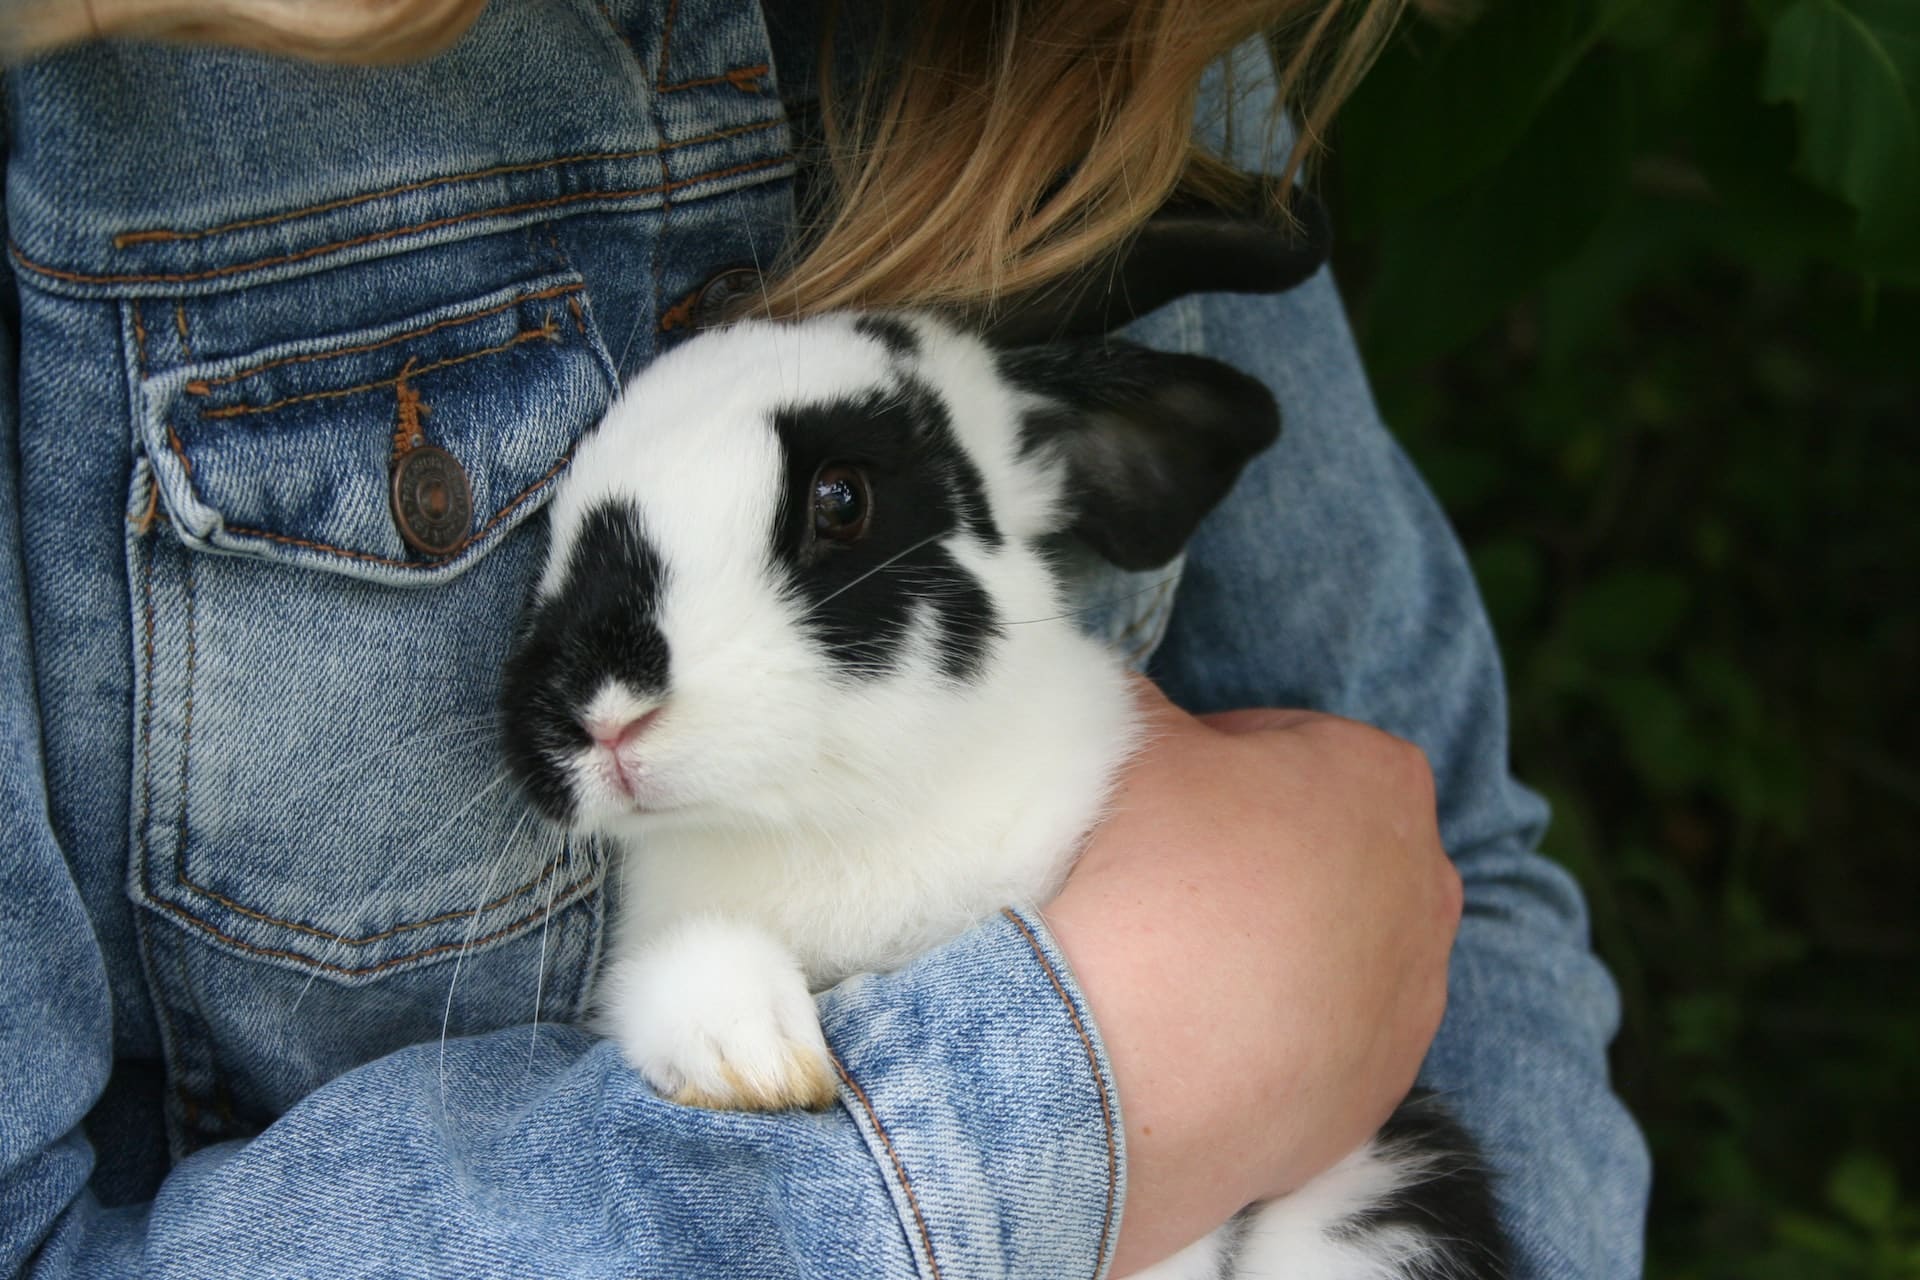 There are some great pets out there like this rabbit that is perfect for New Zealand apartment living!